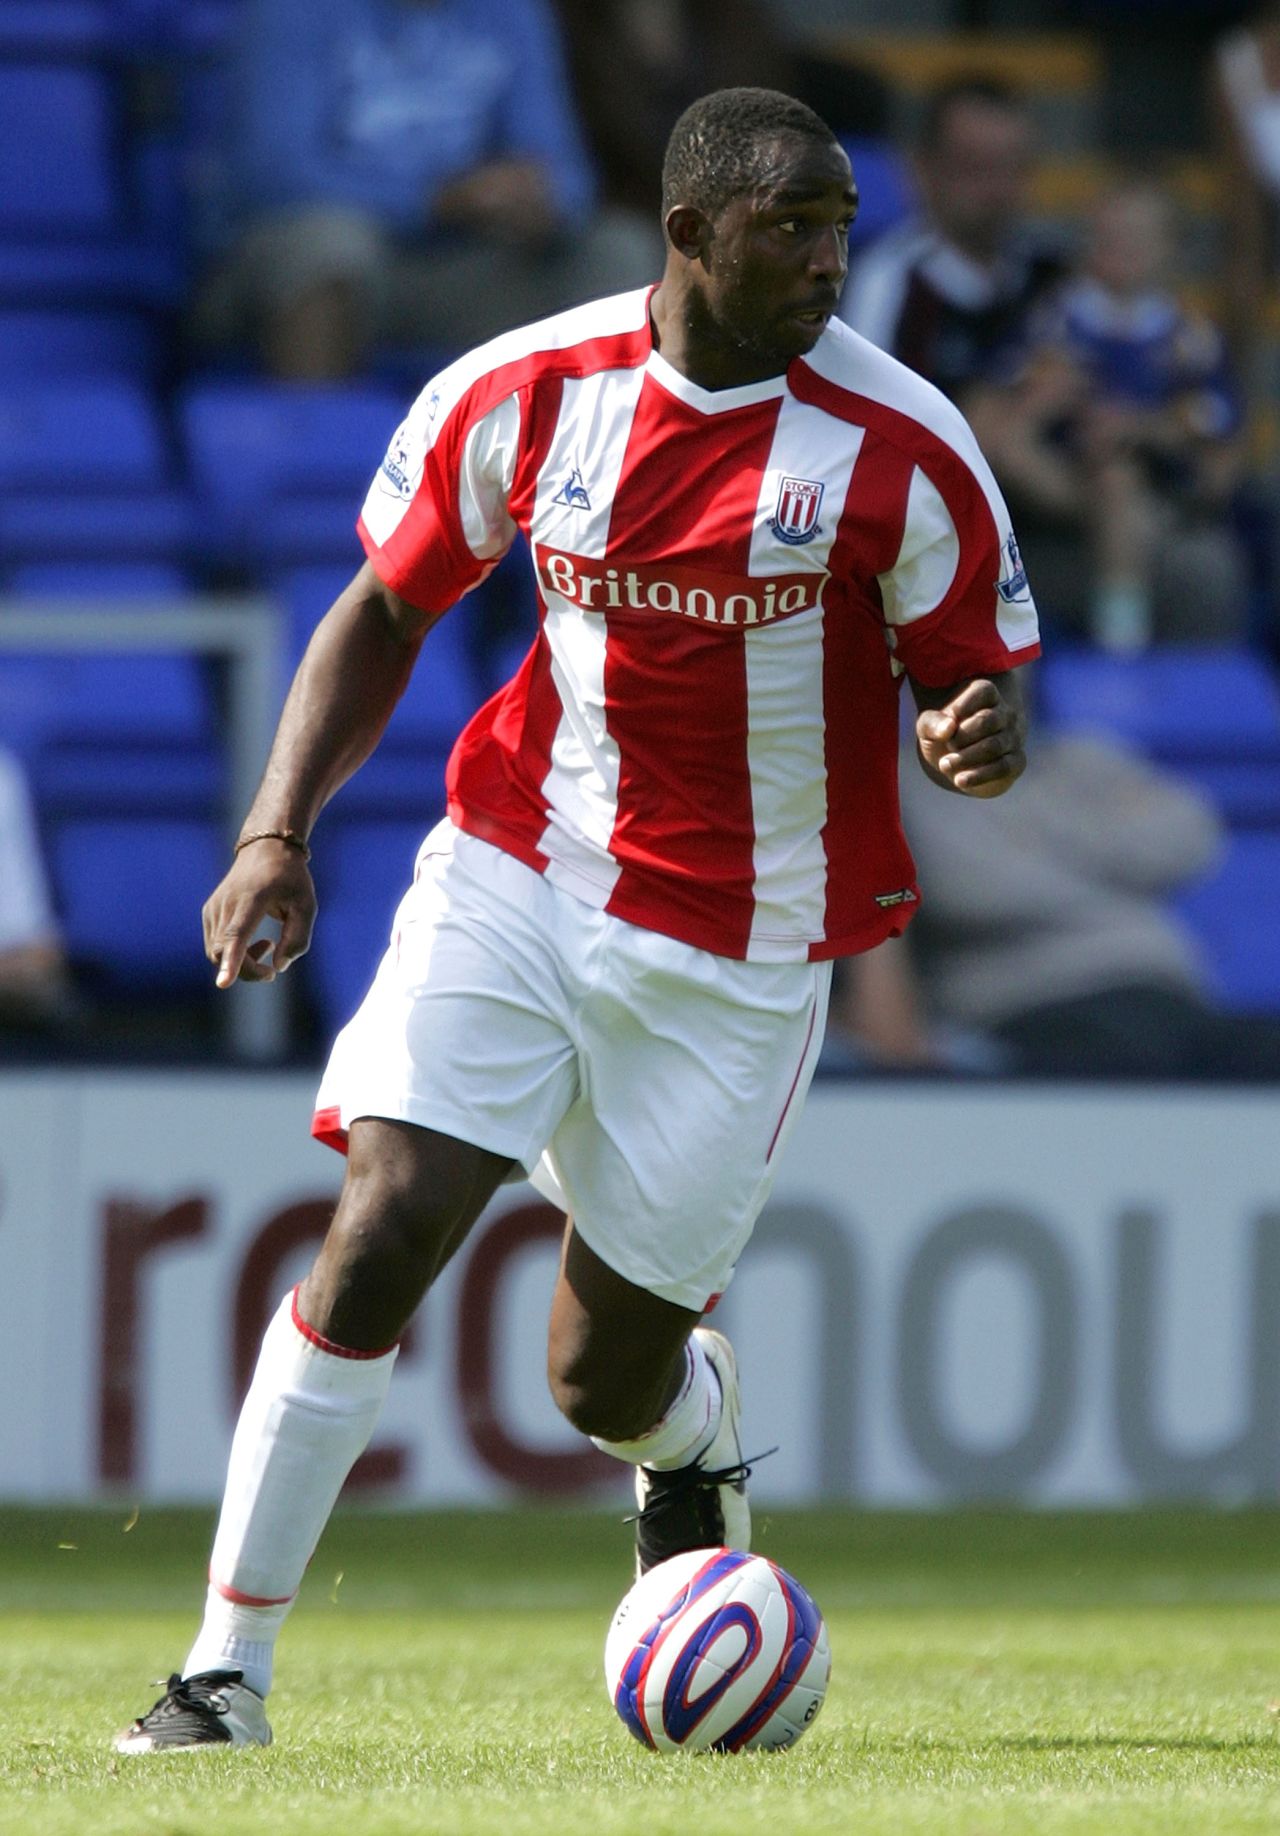 Vincent Pericard was born in Cameroon, before moving to France at an early age.  He started his career at French club St Etienne, before joining Italy's Juventus. He left the Serie A club in 2002 to come to England, where he played for a number of clubs, most notably Portsmouth and Stoke City, before retiring at the age of 29. He has called for a united front in the fight against racism. 